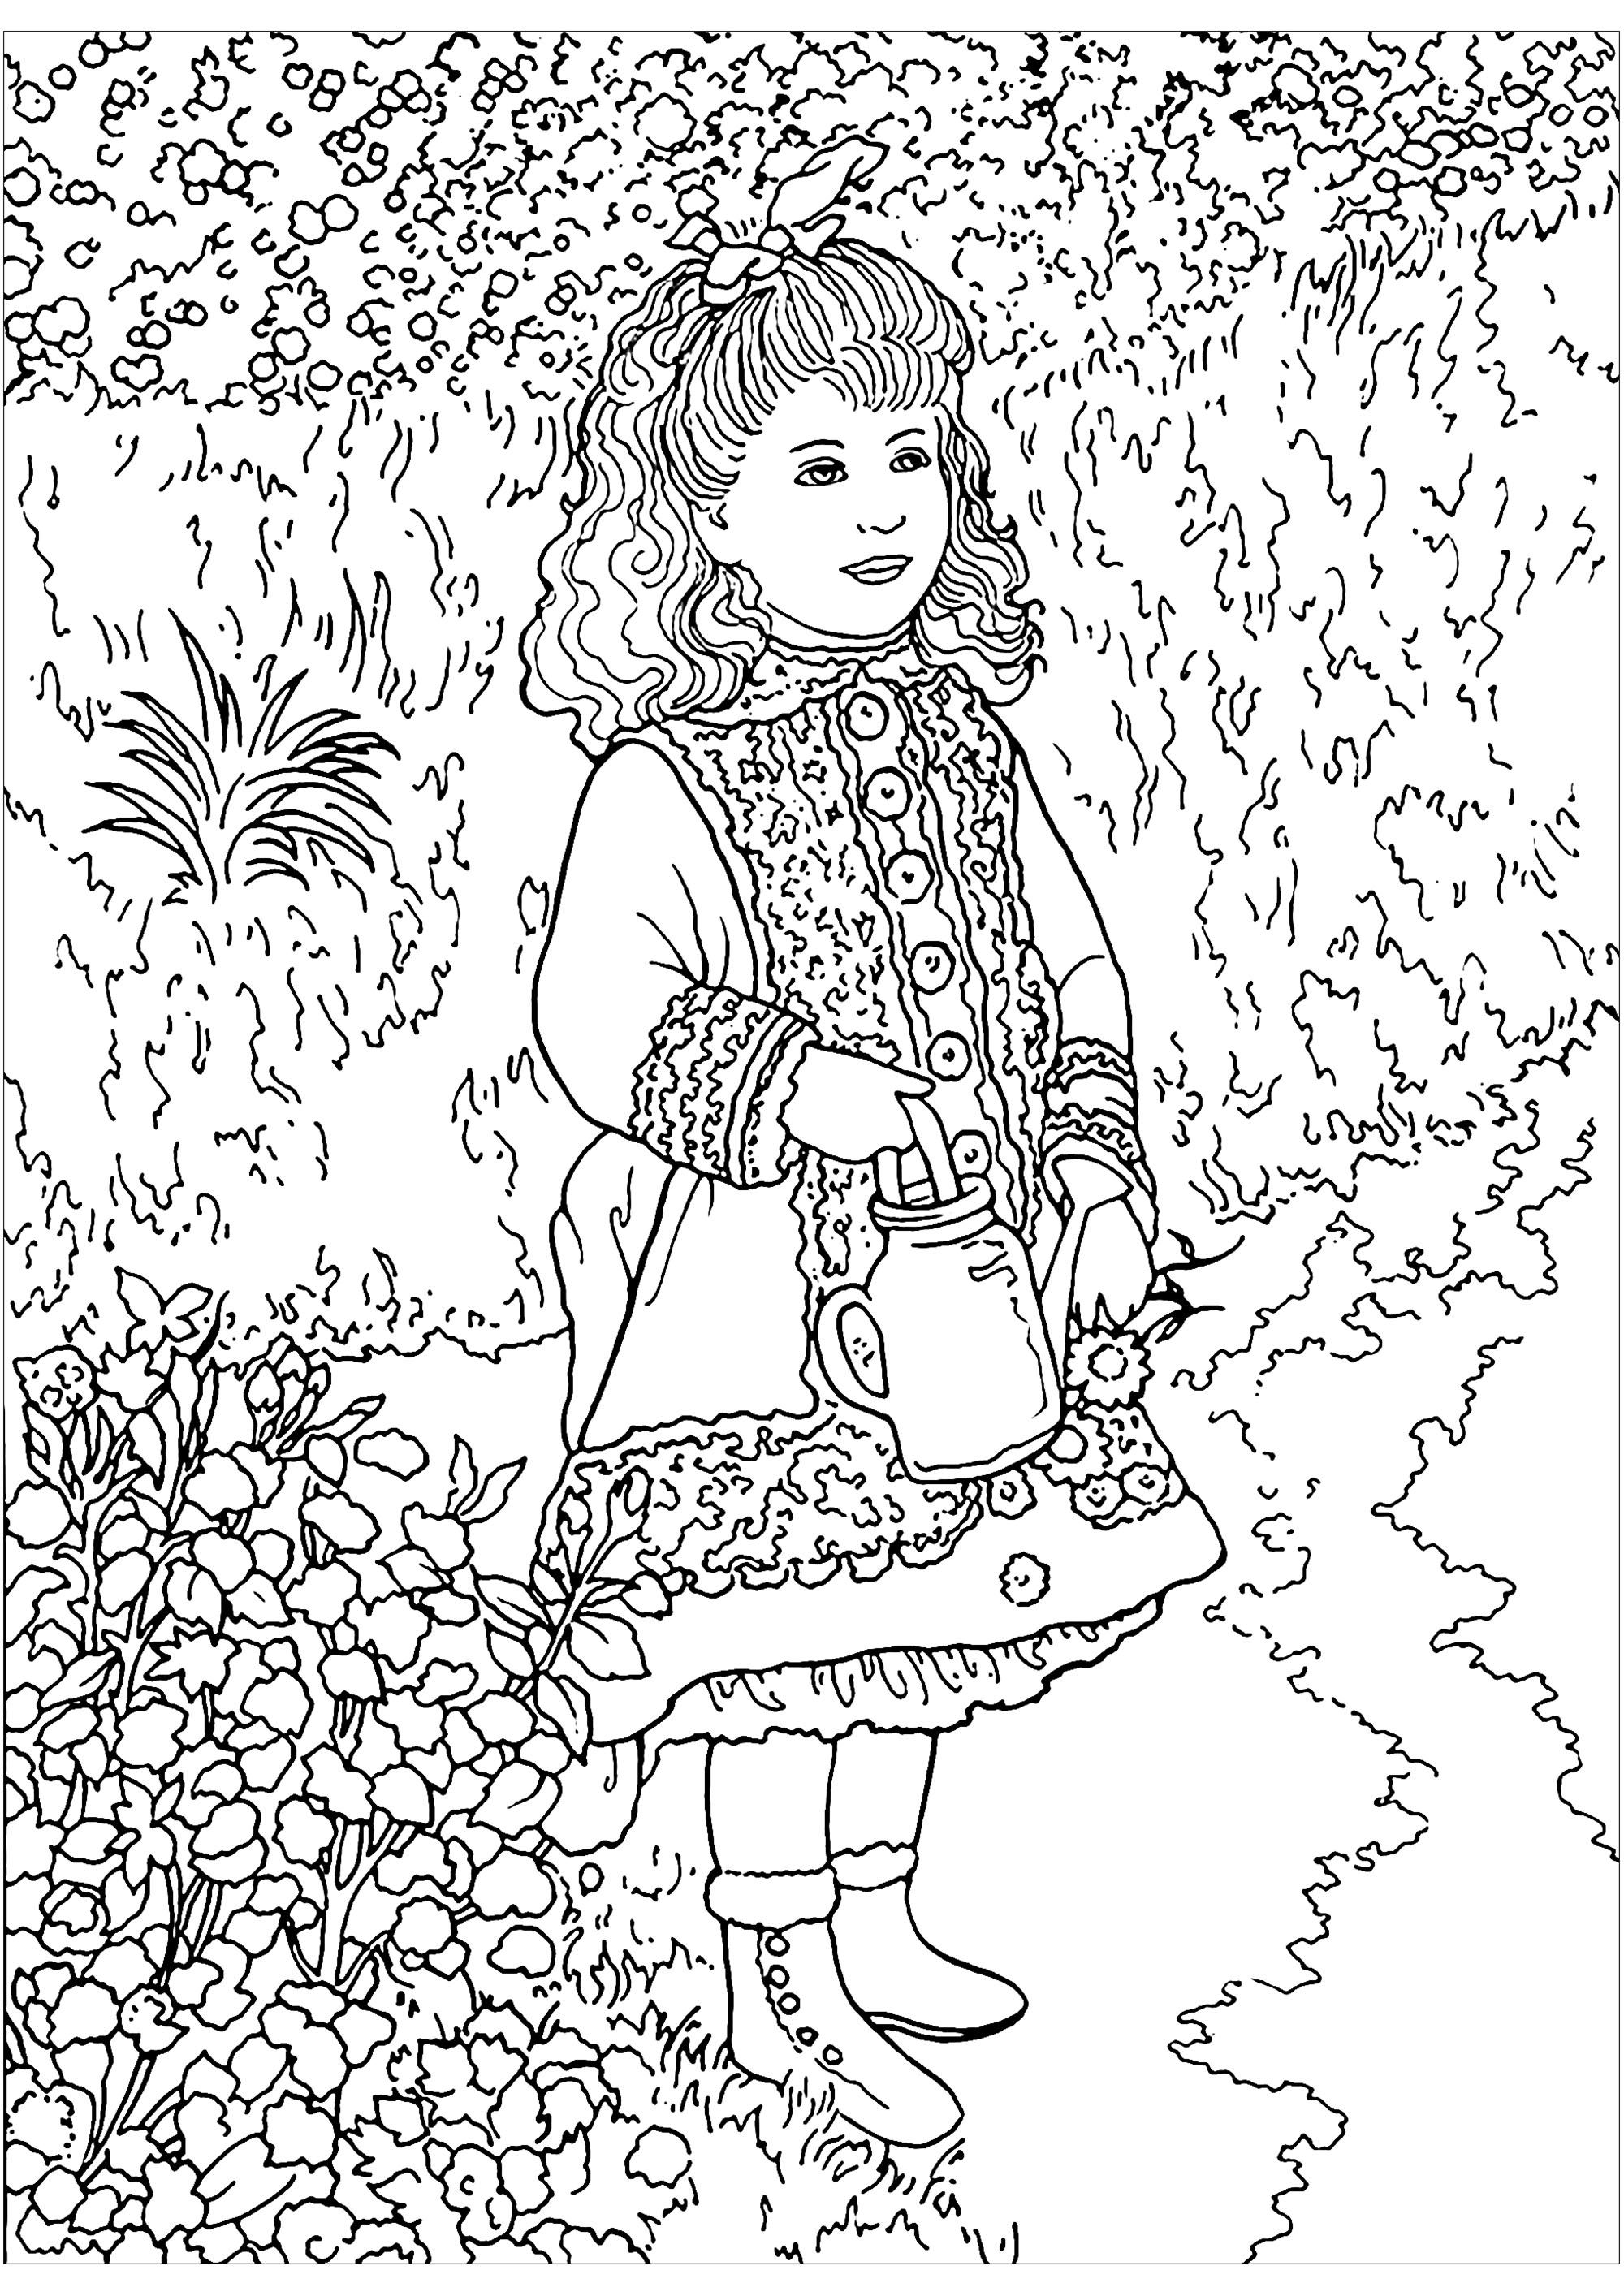 Image of Renoir to download and print for children